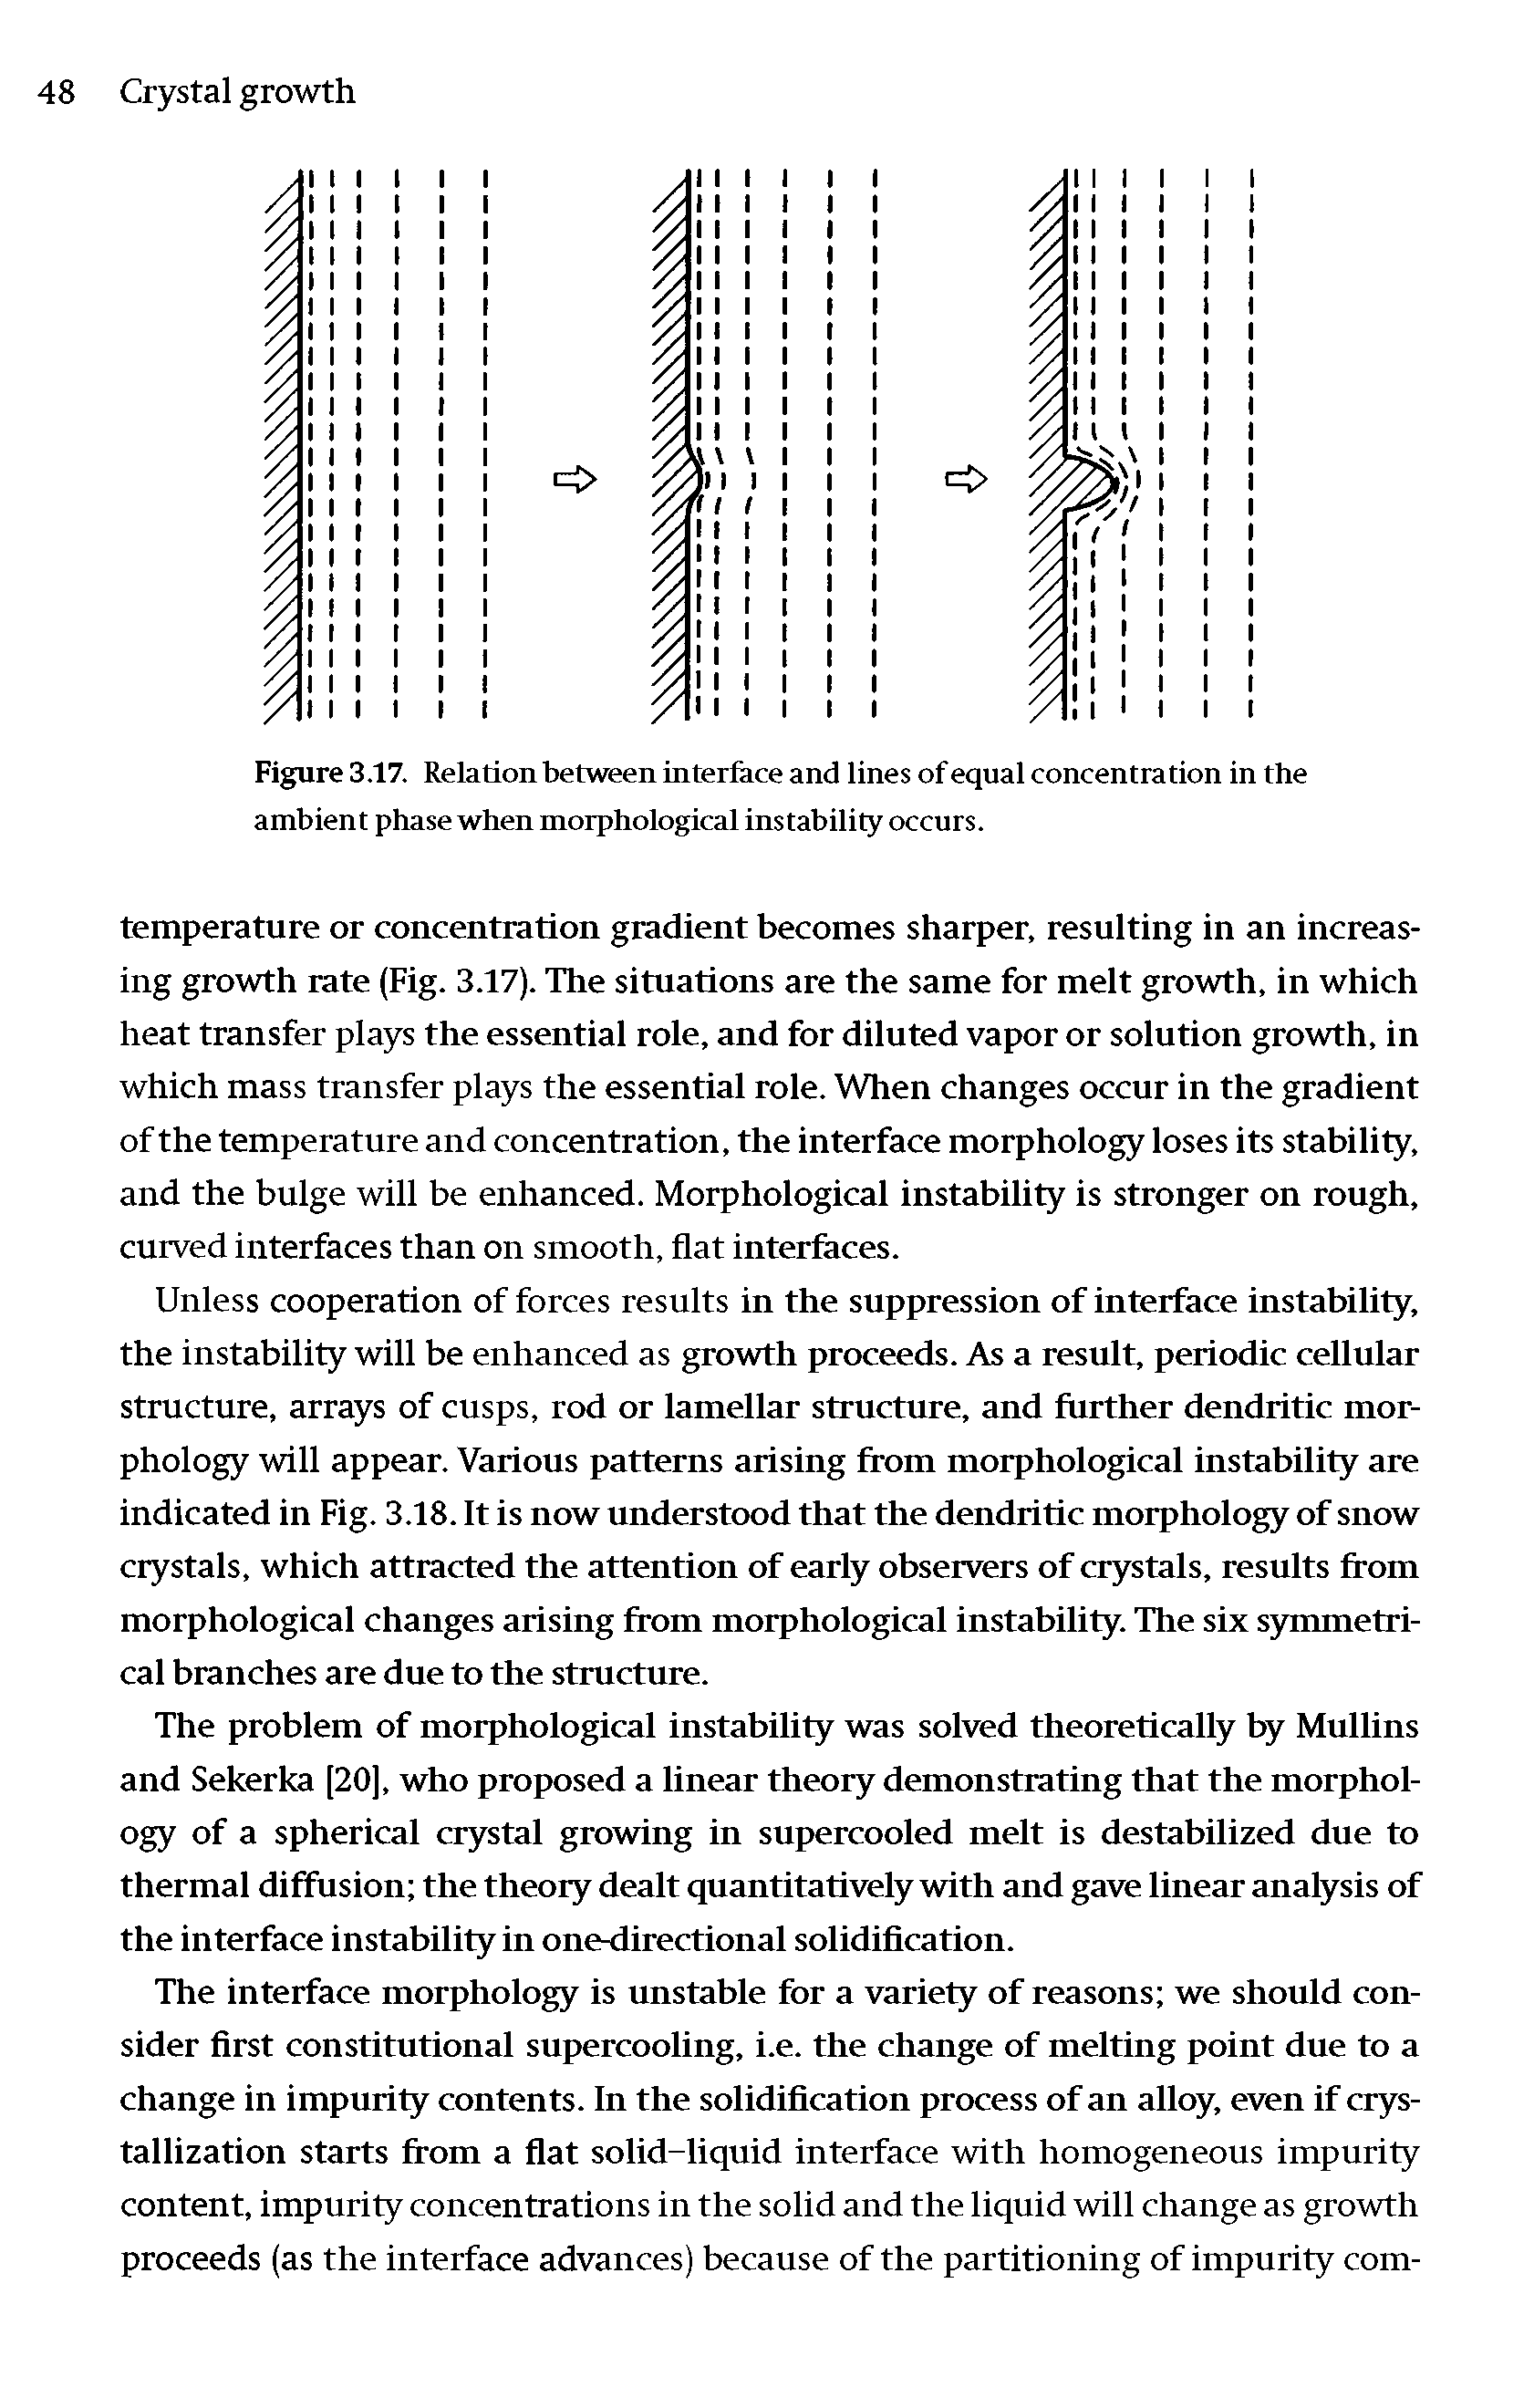 Figure 3.17. Relation between interface and lines of equal concentration in the ambient phase when morphological instability occurs.